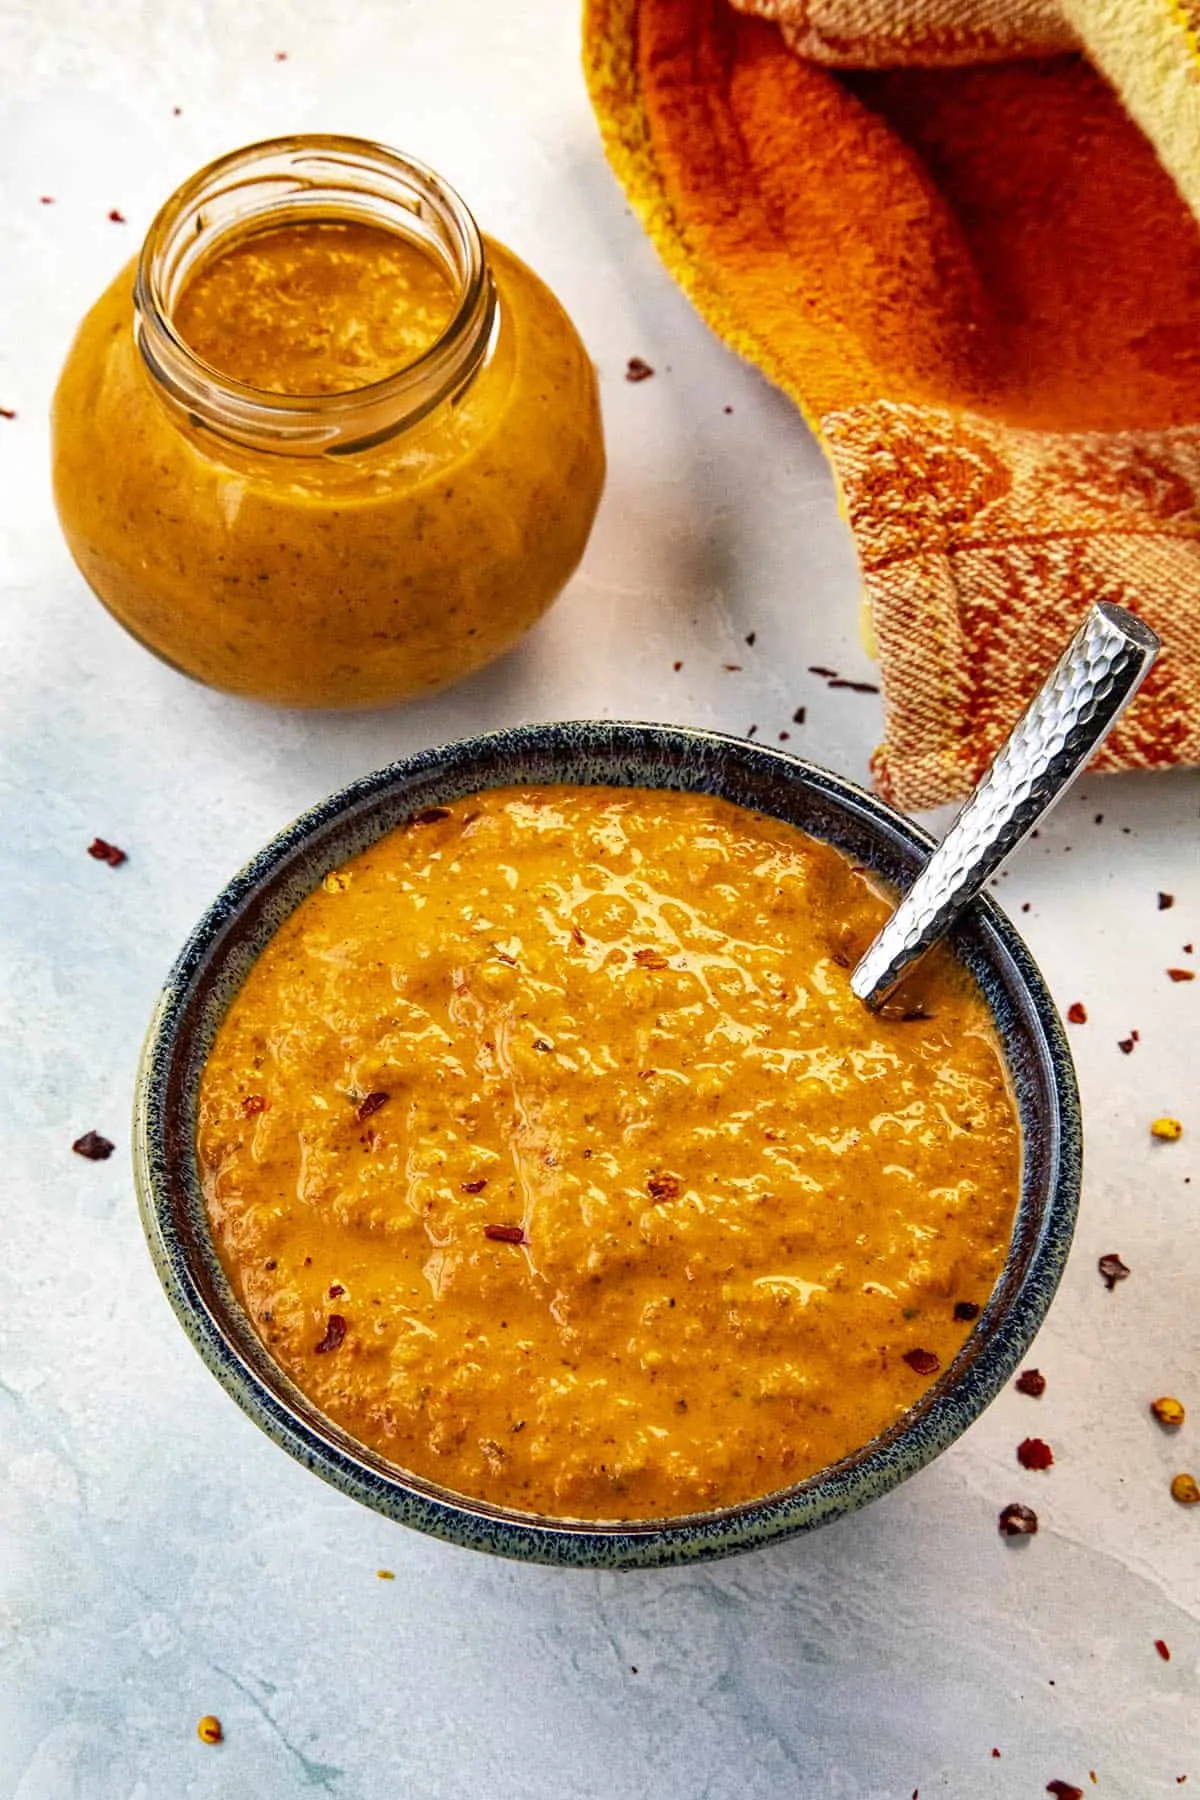 Harissa Sauce in a bowl and in a small jar